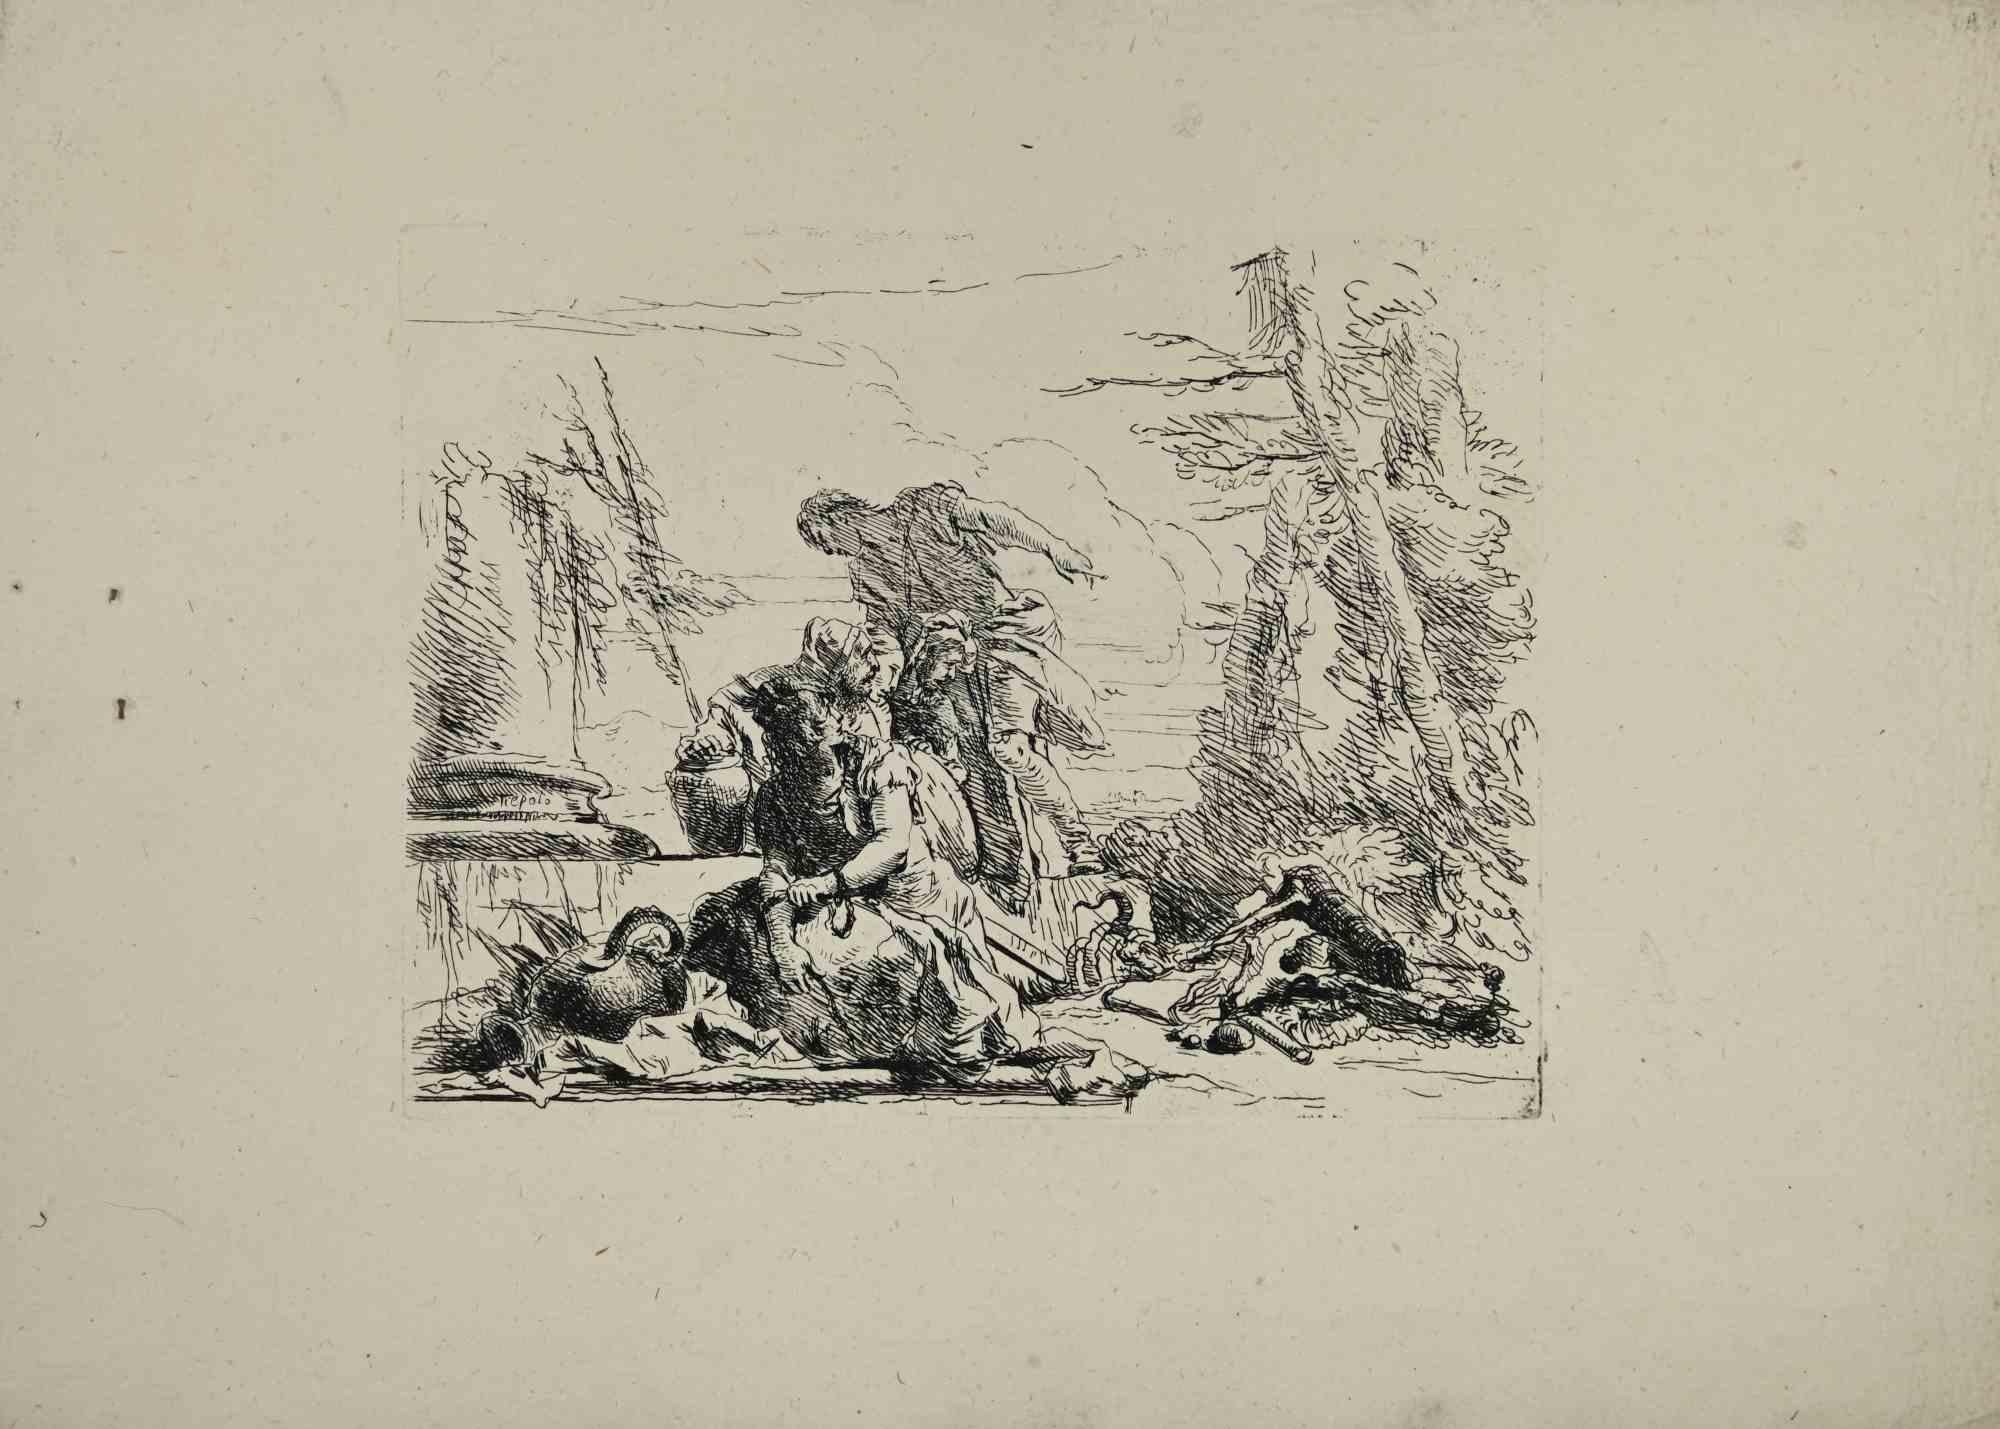 Giovanni Battista Tiepolo Figurative Print - Chained Woman and Four Figures - Etching by G.B. Tiepolo - 1785